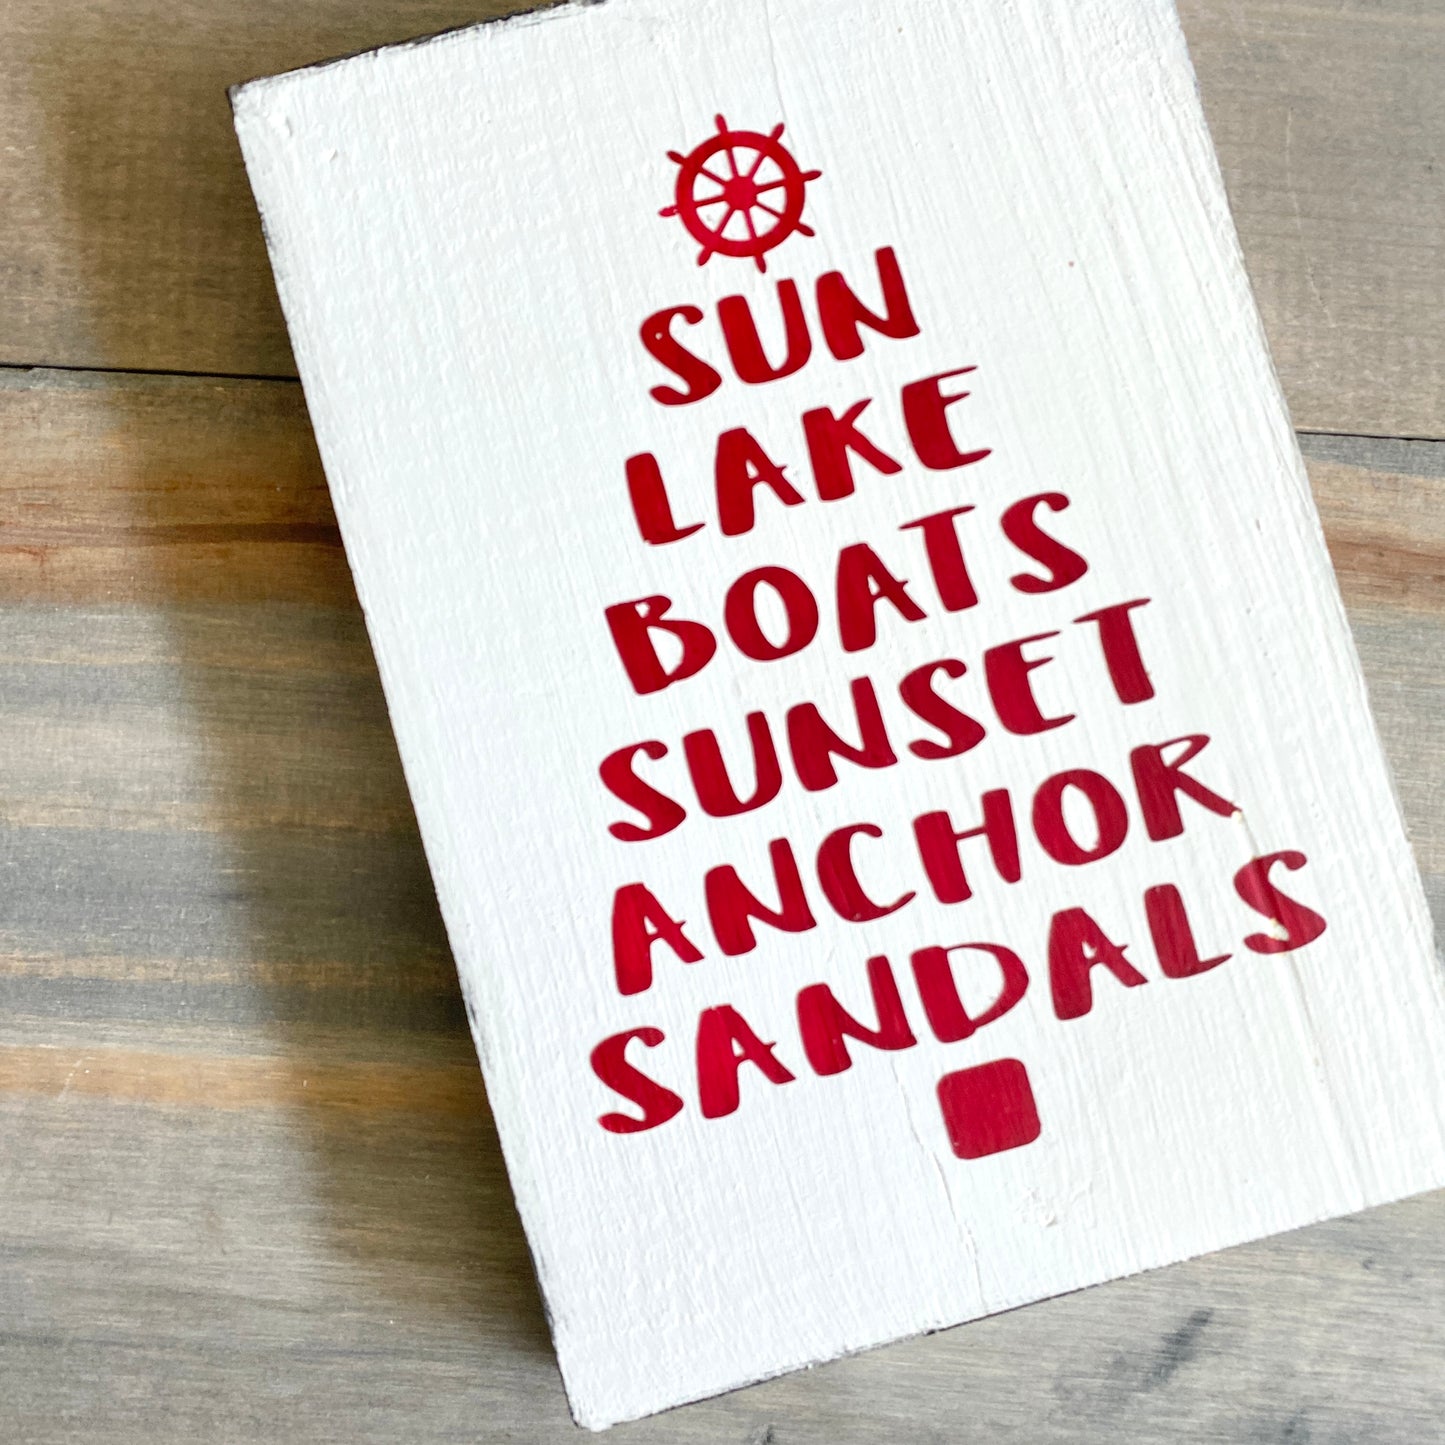 Nautical Christmas Decor for Lake House, Anchored Soul Designs Lake Words Christmas Tree wood sign white background with red design, beach house holiday decor nautical design